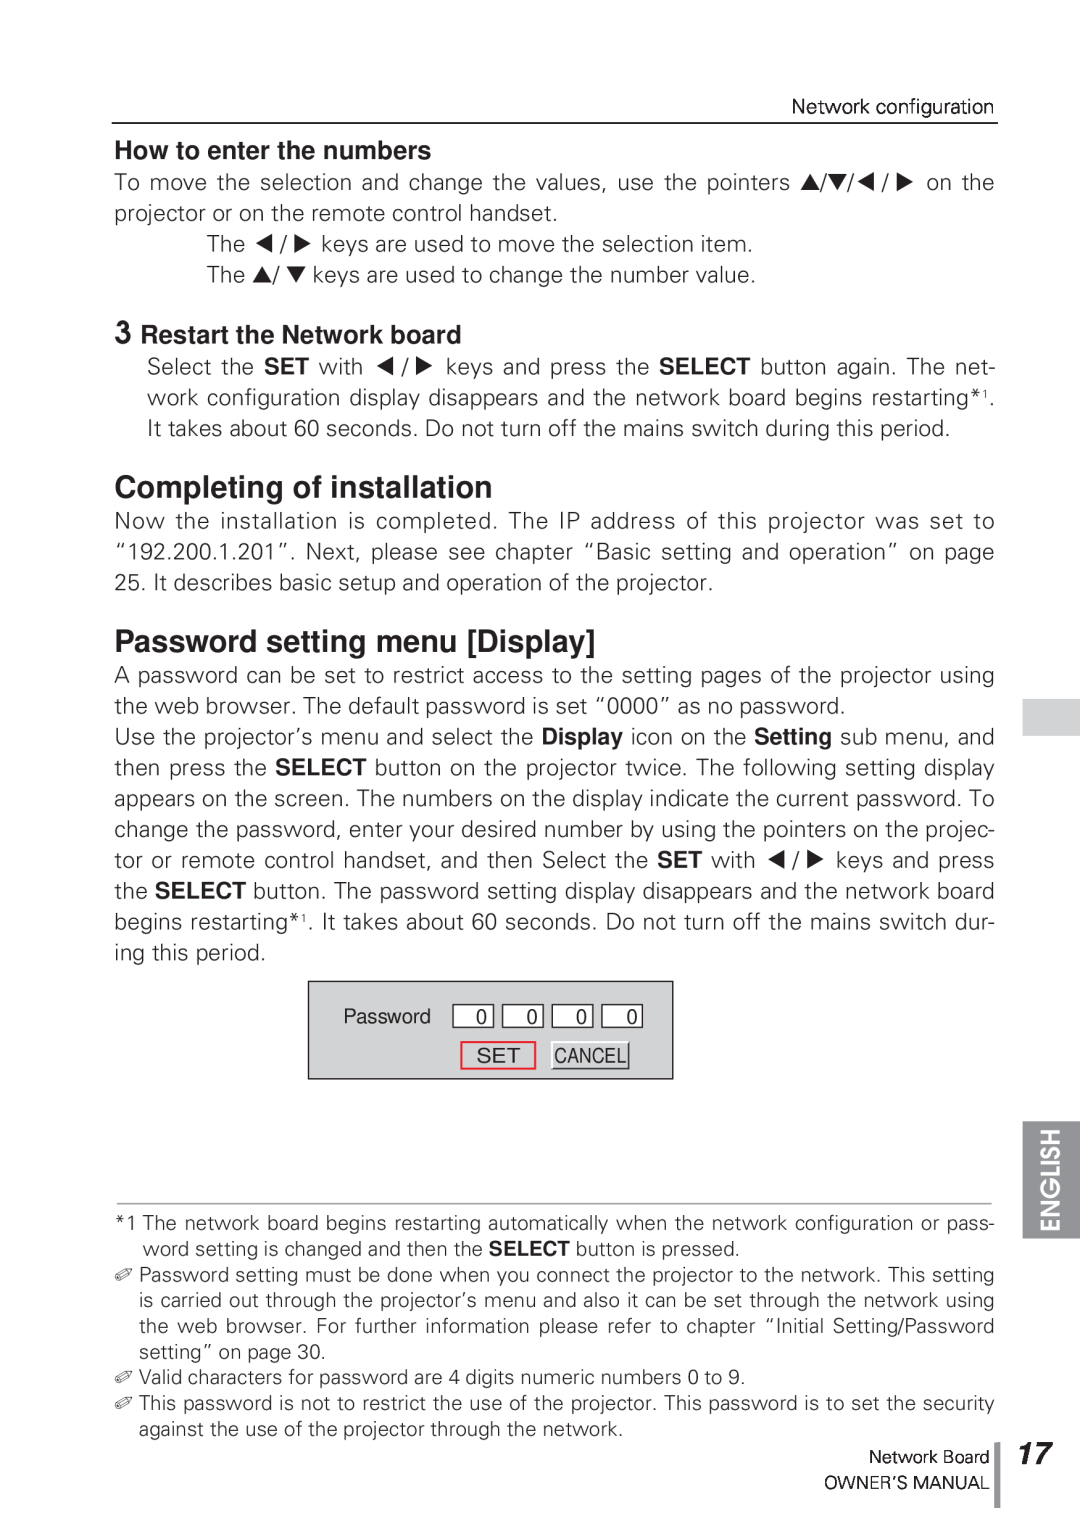 Eiki MD13NET owner manual Completing of installation, Password setting menu Display, How to enter the numbers, English 